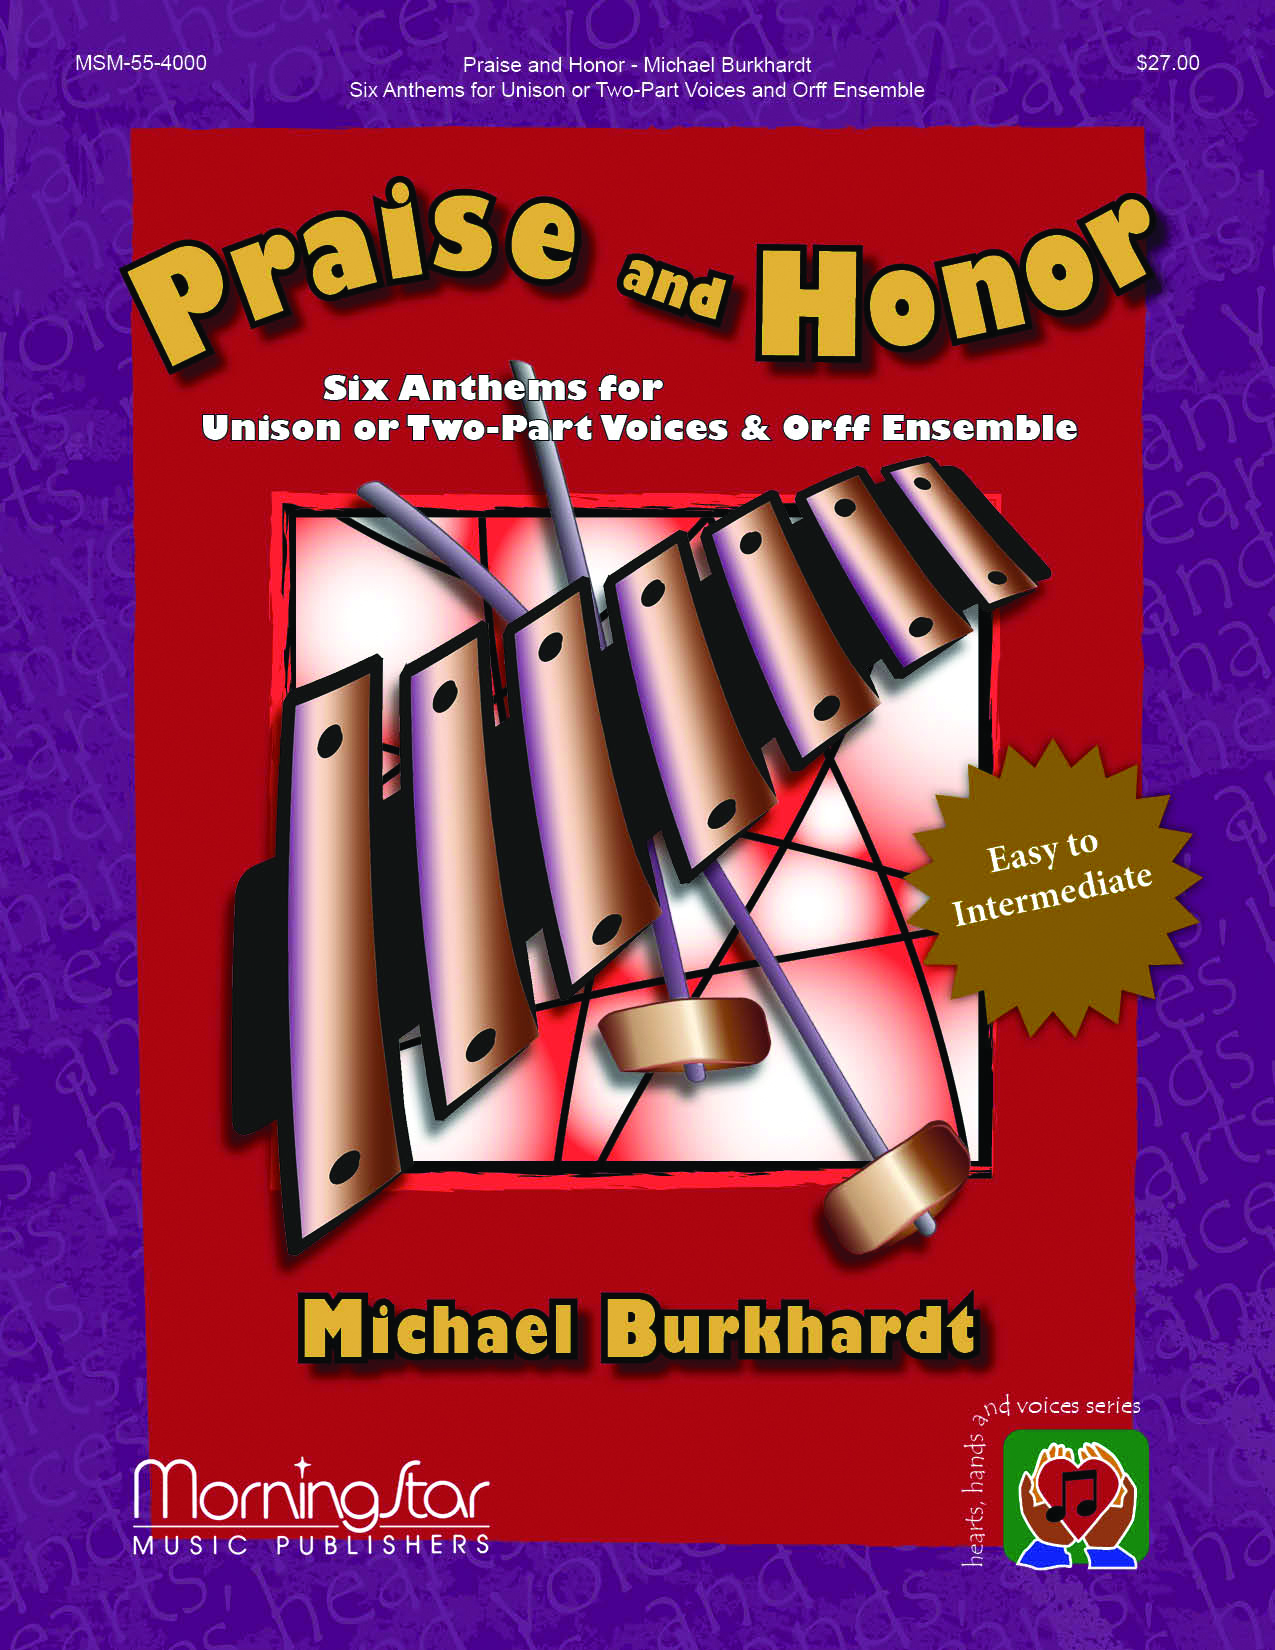 Praise and Honor: Six Anthems for Unison or Two-Part Voices and Orff Ensemble